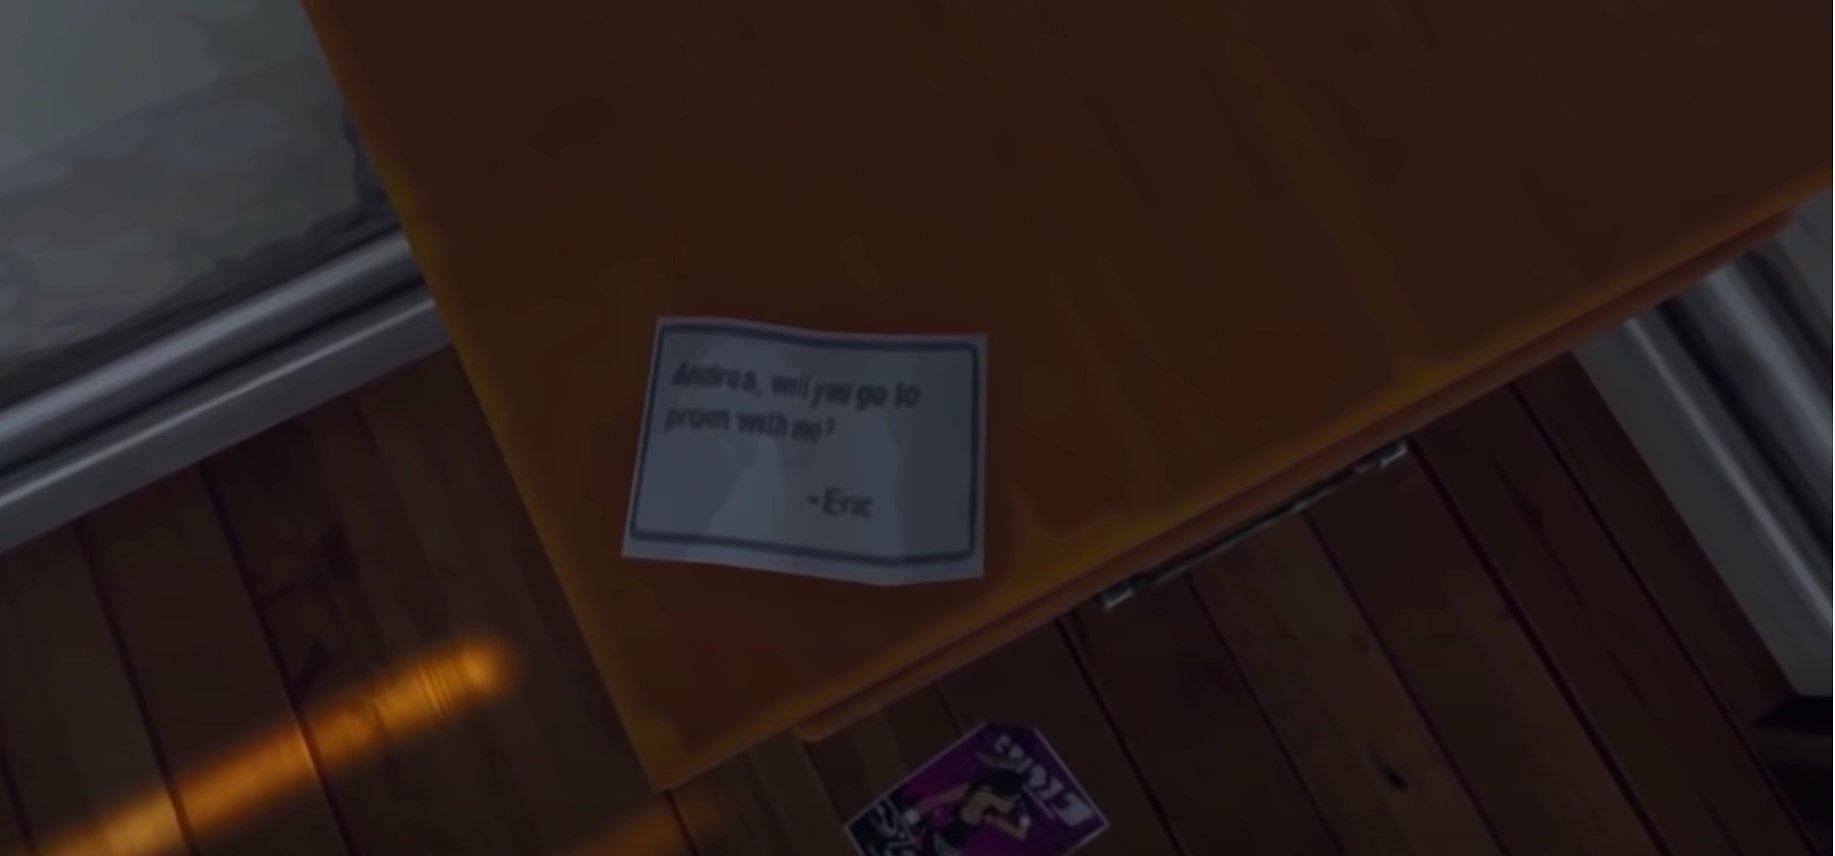 Eric asks Andrea out in Fortnite (Image via YouTube/PlayStationGrenade)